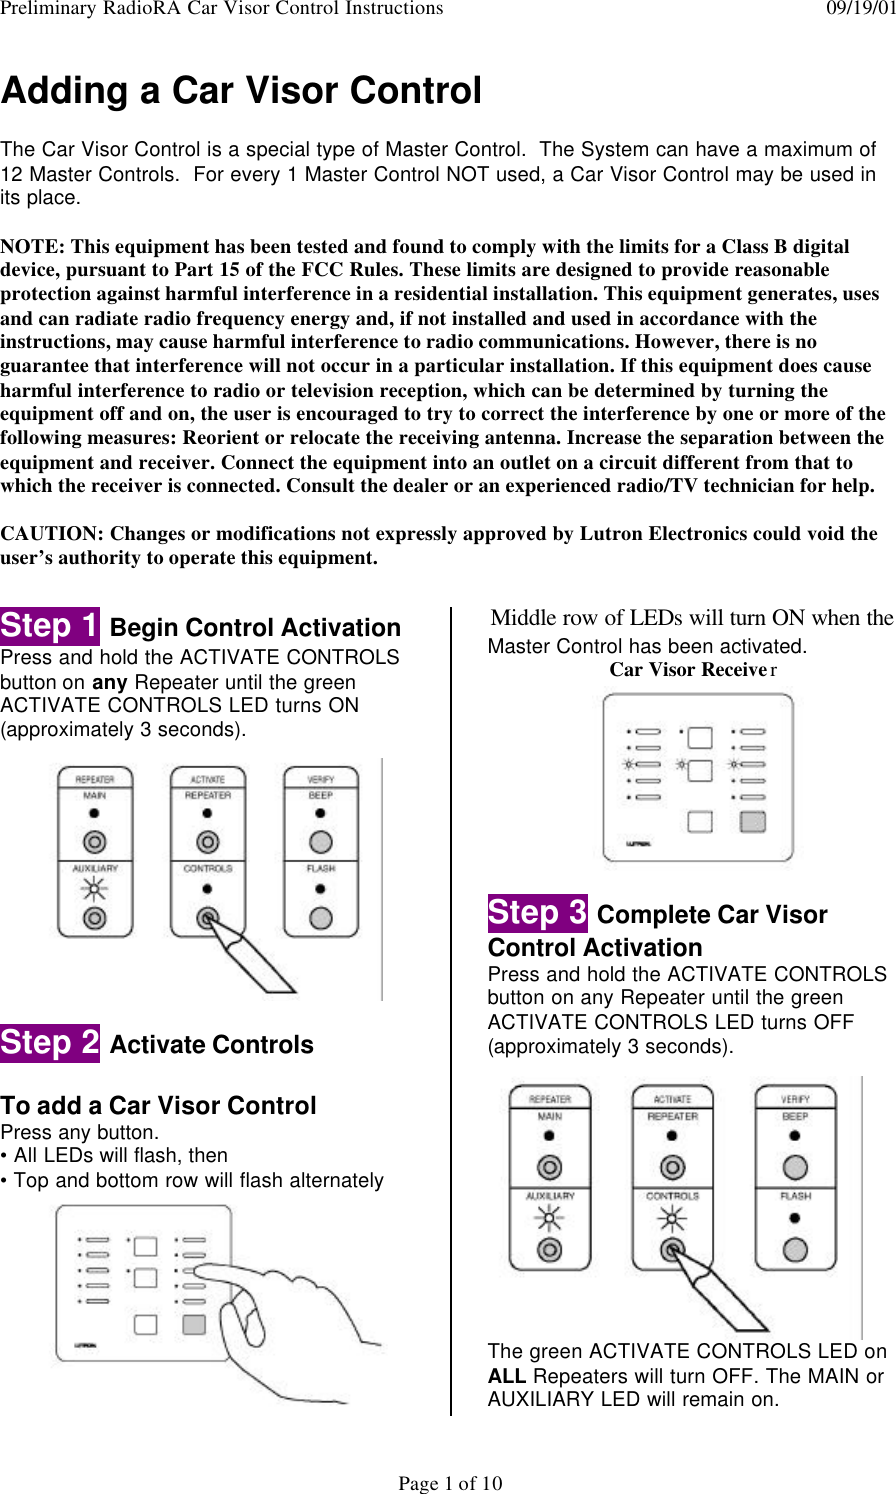 Preliminary RadioRA Car Visor Control Instructions  09/19/01Page 1 of 10Adding a Car Visor ControlThe Car Visor Control is a special type of Master Control.  The System can have a maximum of12 Master Controls.  For every 1 Master Control NOT used, a Car Visor Control may be used inits place.NOTE: This equipment has been tested and found to comply with the limits for a Class B digitaldevice, pursuant to Part 15 of the FCC Rules. These limits are designed to provide reasonableprotection against harmful interference in a residential installation. This equipment generates, usesand can radiate radio frequency energy and, if not installed and used in accordance with theinstructions, may cause harmful interference to radio communications. However, there is noguarantee that interference will not occur in a particular installation. If this equipment does causeharmful interference to radio or television reception, which can be determined by turning theequipment off and on, the user is encouraged to try to correct the interference by one or more of thefollowing measures: Reorient or relocate the receiving antenna. Increase the separation between theequipment and receiver. Connect the equipment into an outlet on a circuit different from that towhich the receiver is connected. Consult the dealer or an experienced radio/TV technician for help.CAUTION: Changes or modifications not expressly approved by Lutron Electronics could void theuser’s authority to operate this equipment.Step 1 Begin Control ActivationPress and hold the ACTIVATE CONTROLSbutton on any Repeater until the greenACTIVATE CONTROLS LED turns ON(approximately 3 seconds).Step 2 Activate ControlsTo add a Car Visor ControlPress any button.• All LEDs will flash, then• Top and bottom row will flash alternatelyMiddle row of LEDs will turn ON when theMaster Control has been activated.Car Visor ReceiverStep 3 Complete Car VisorControl ActivationPress and hold the ACTIVATE CONTROLSbutton on any Repeater until the greenACTIVATE CONTROLS LED turns OFF(approximately 3 seconds).The green ACTIVATE CONTROLS LED onALL Repeaters will turn OFF. The MAIN orAUXILIARY LED will remain on.